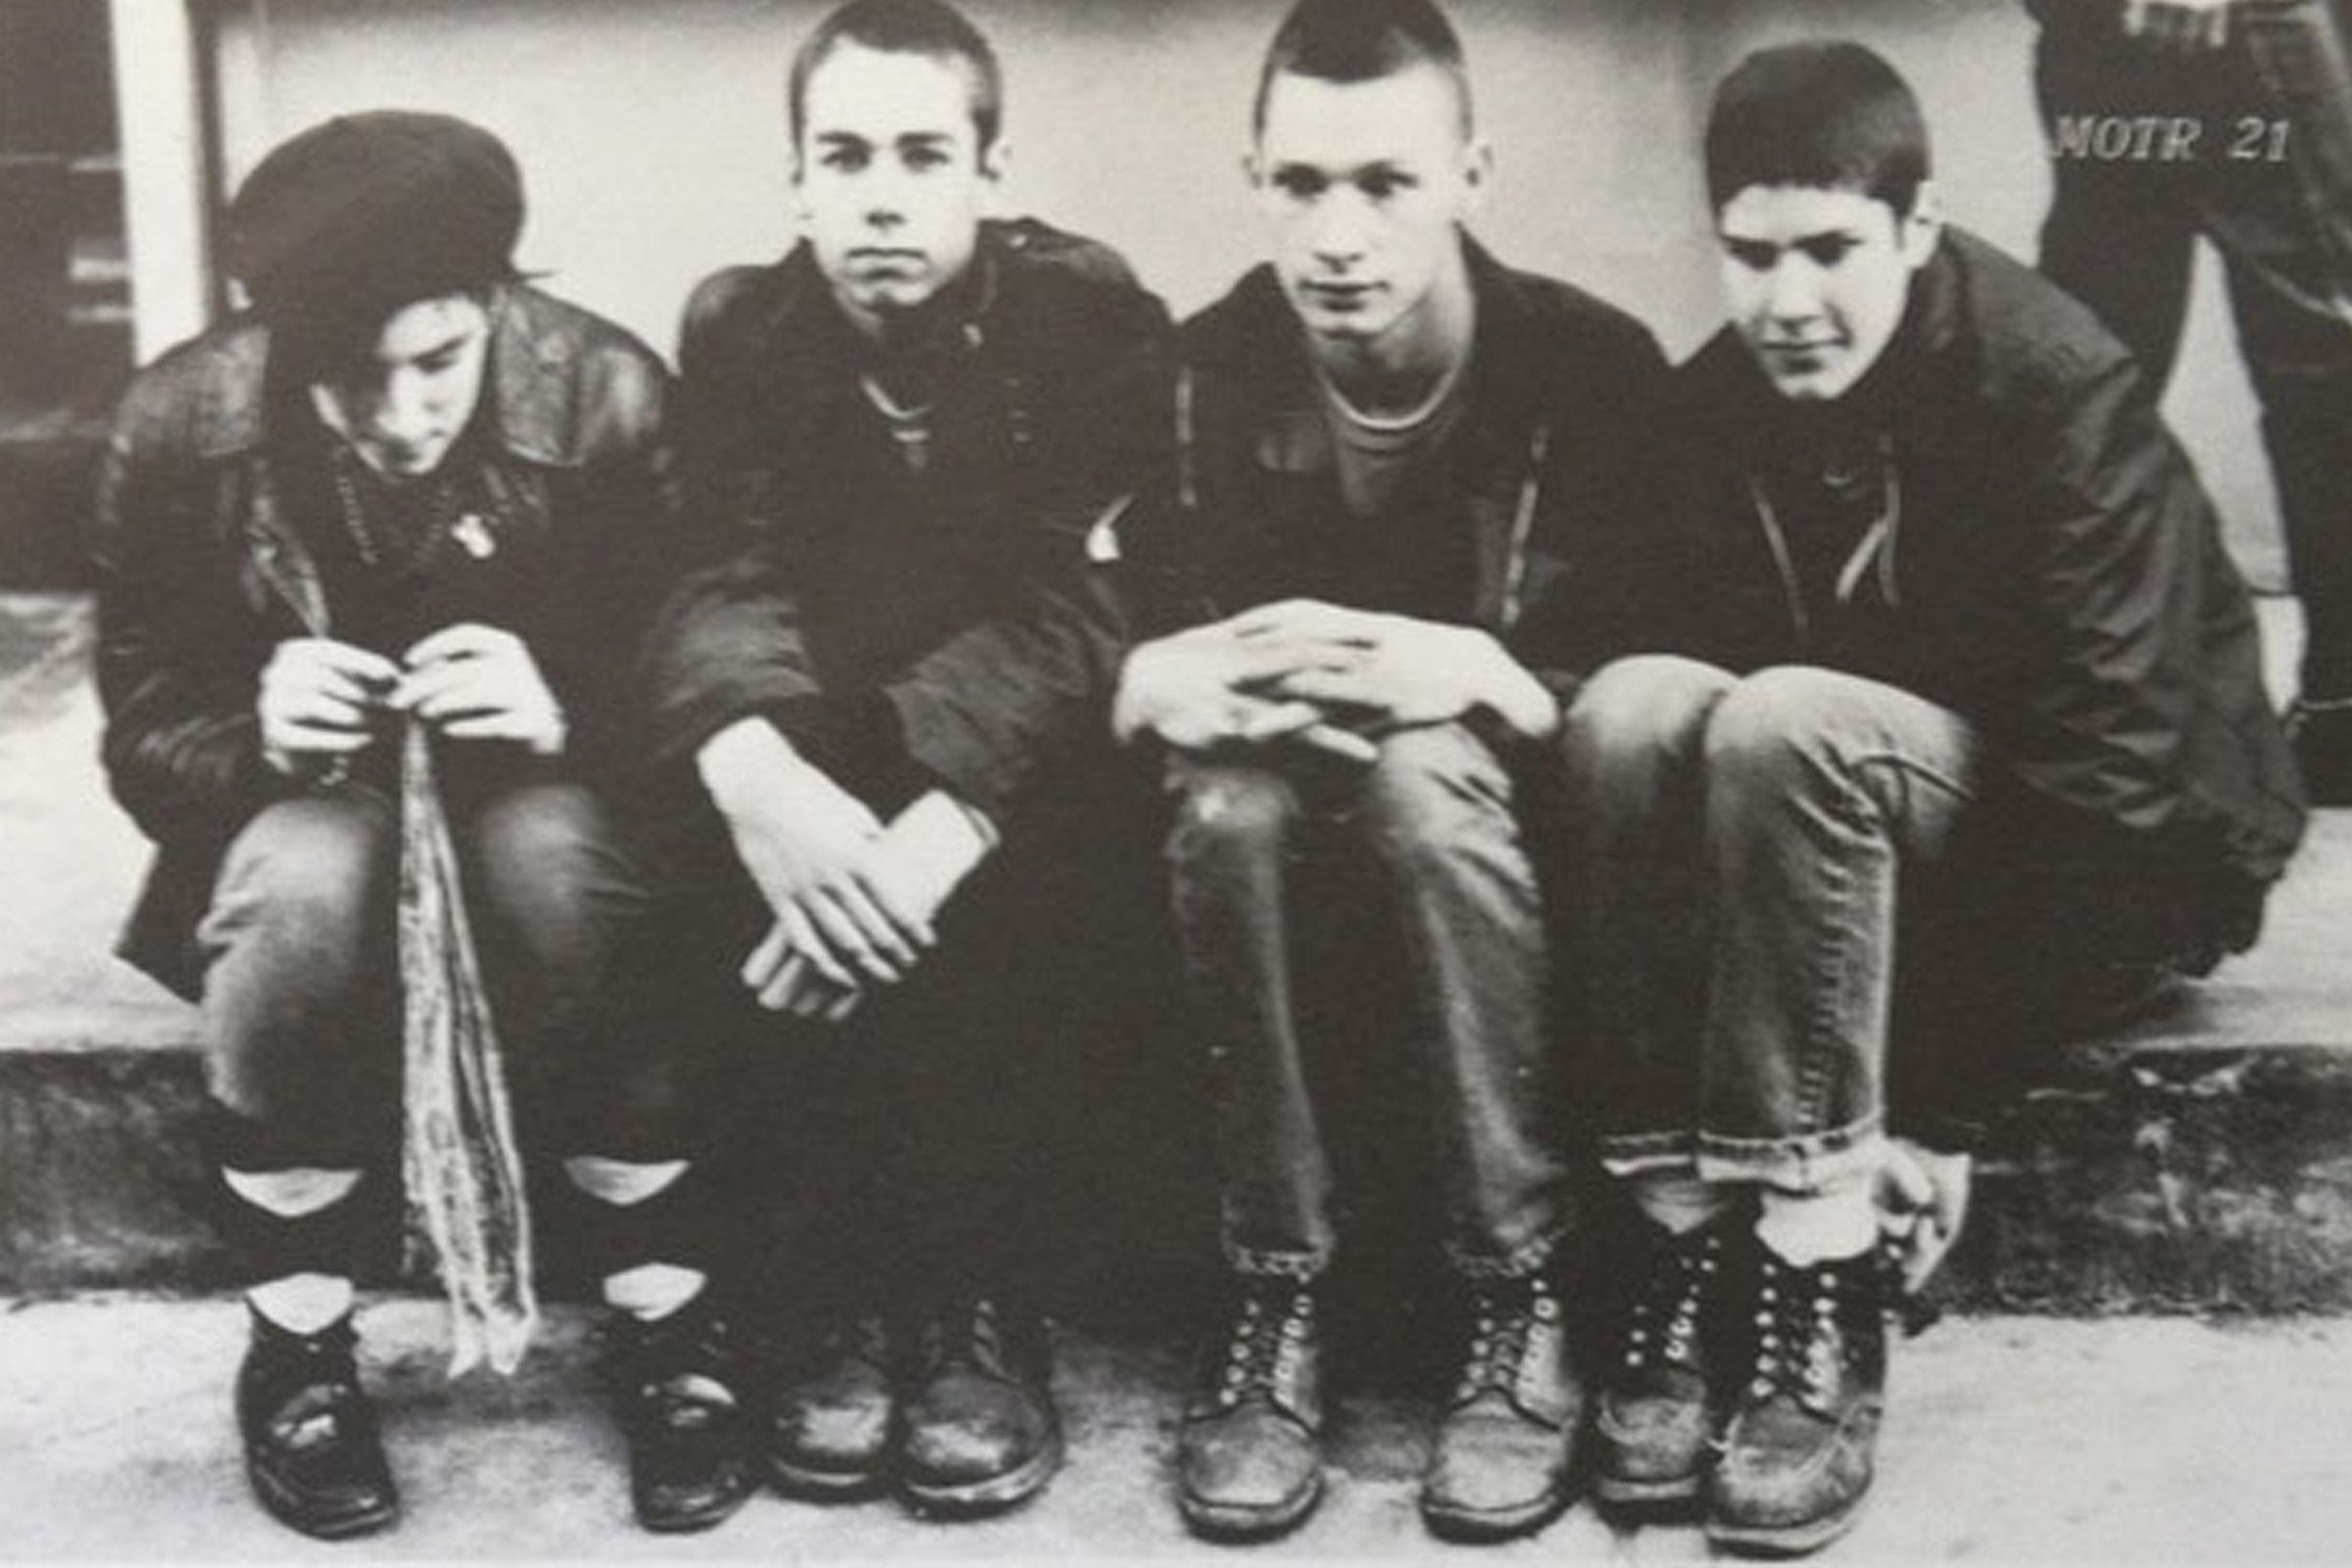 The Young Aborigines, a precursor to what would become The Beastie Boys, in 1982